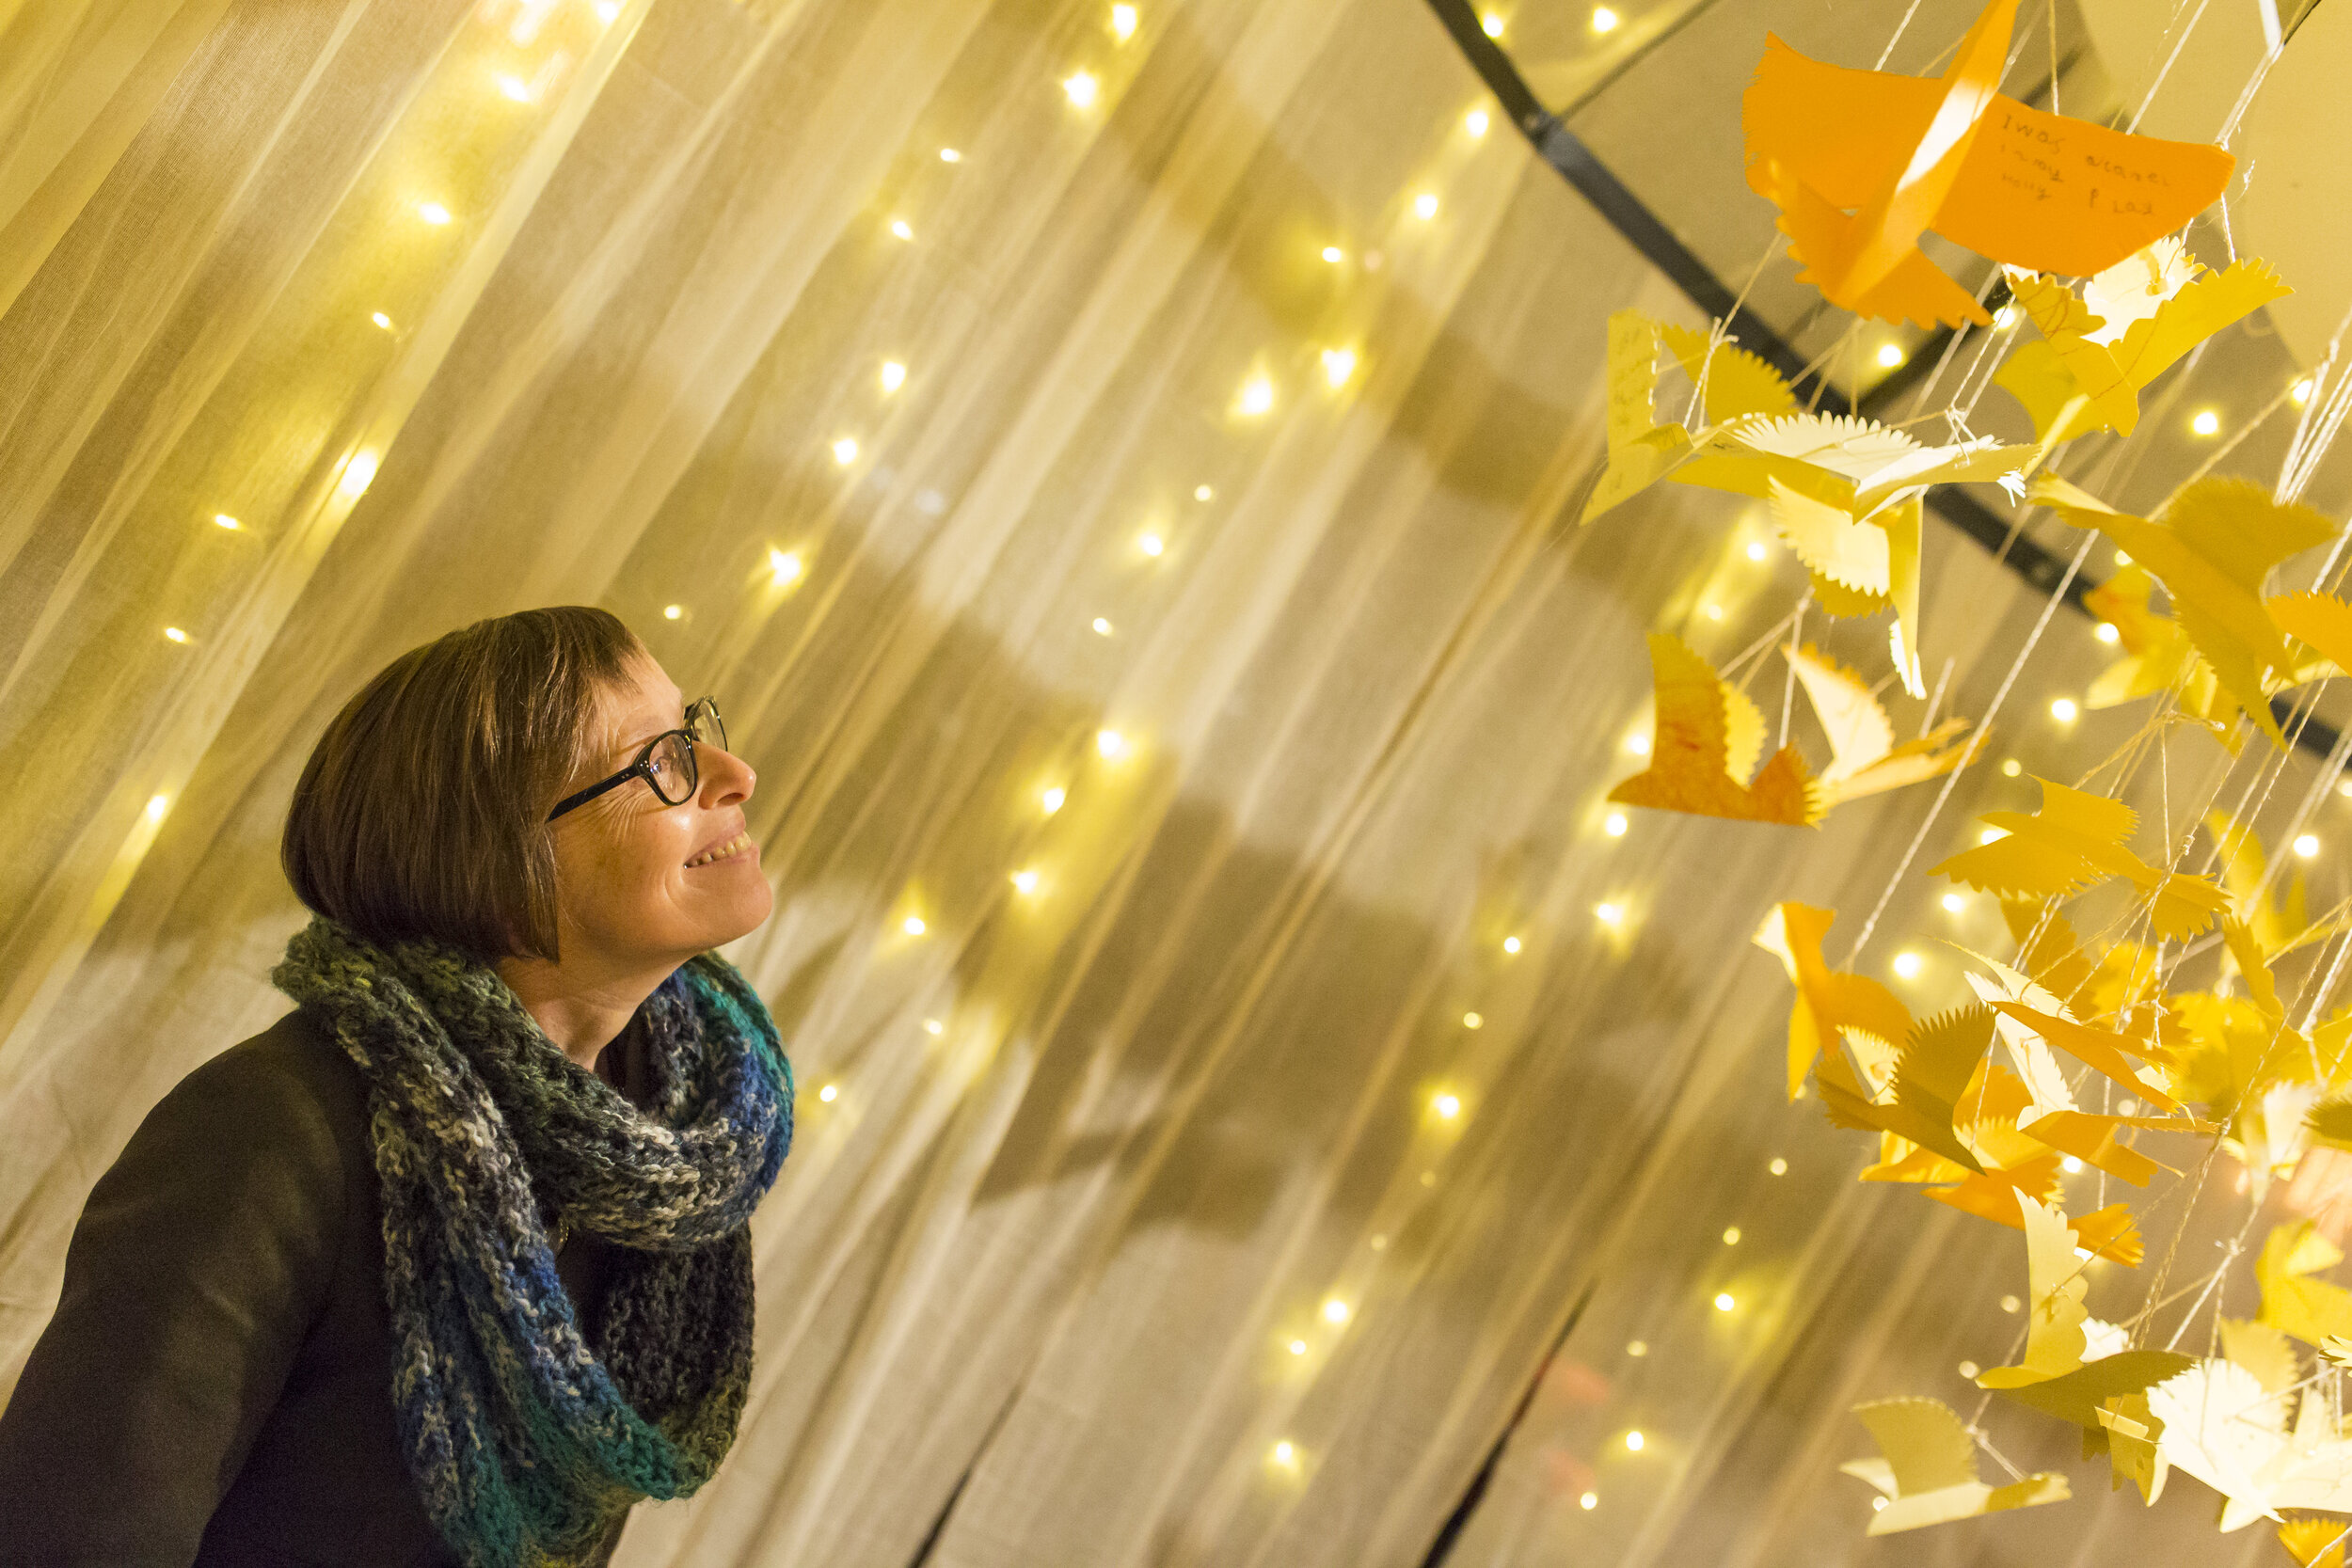  A woman looks up towards the origami birds. 